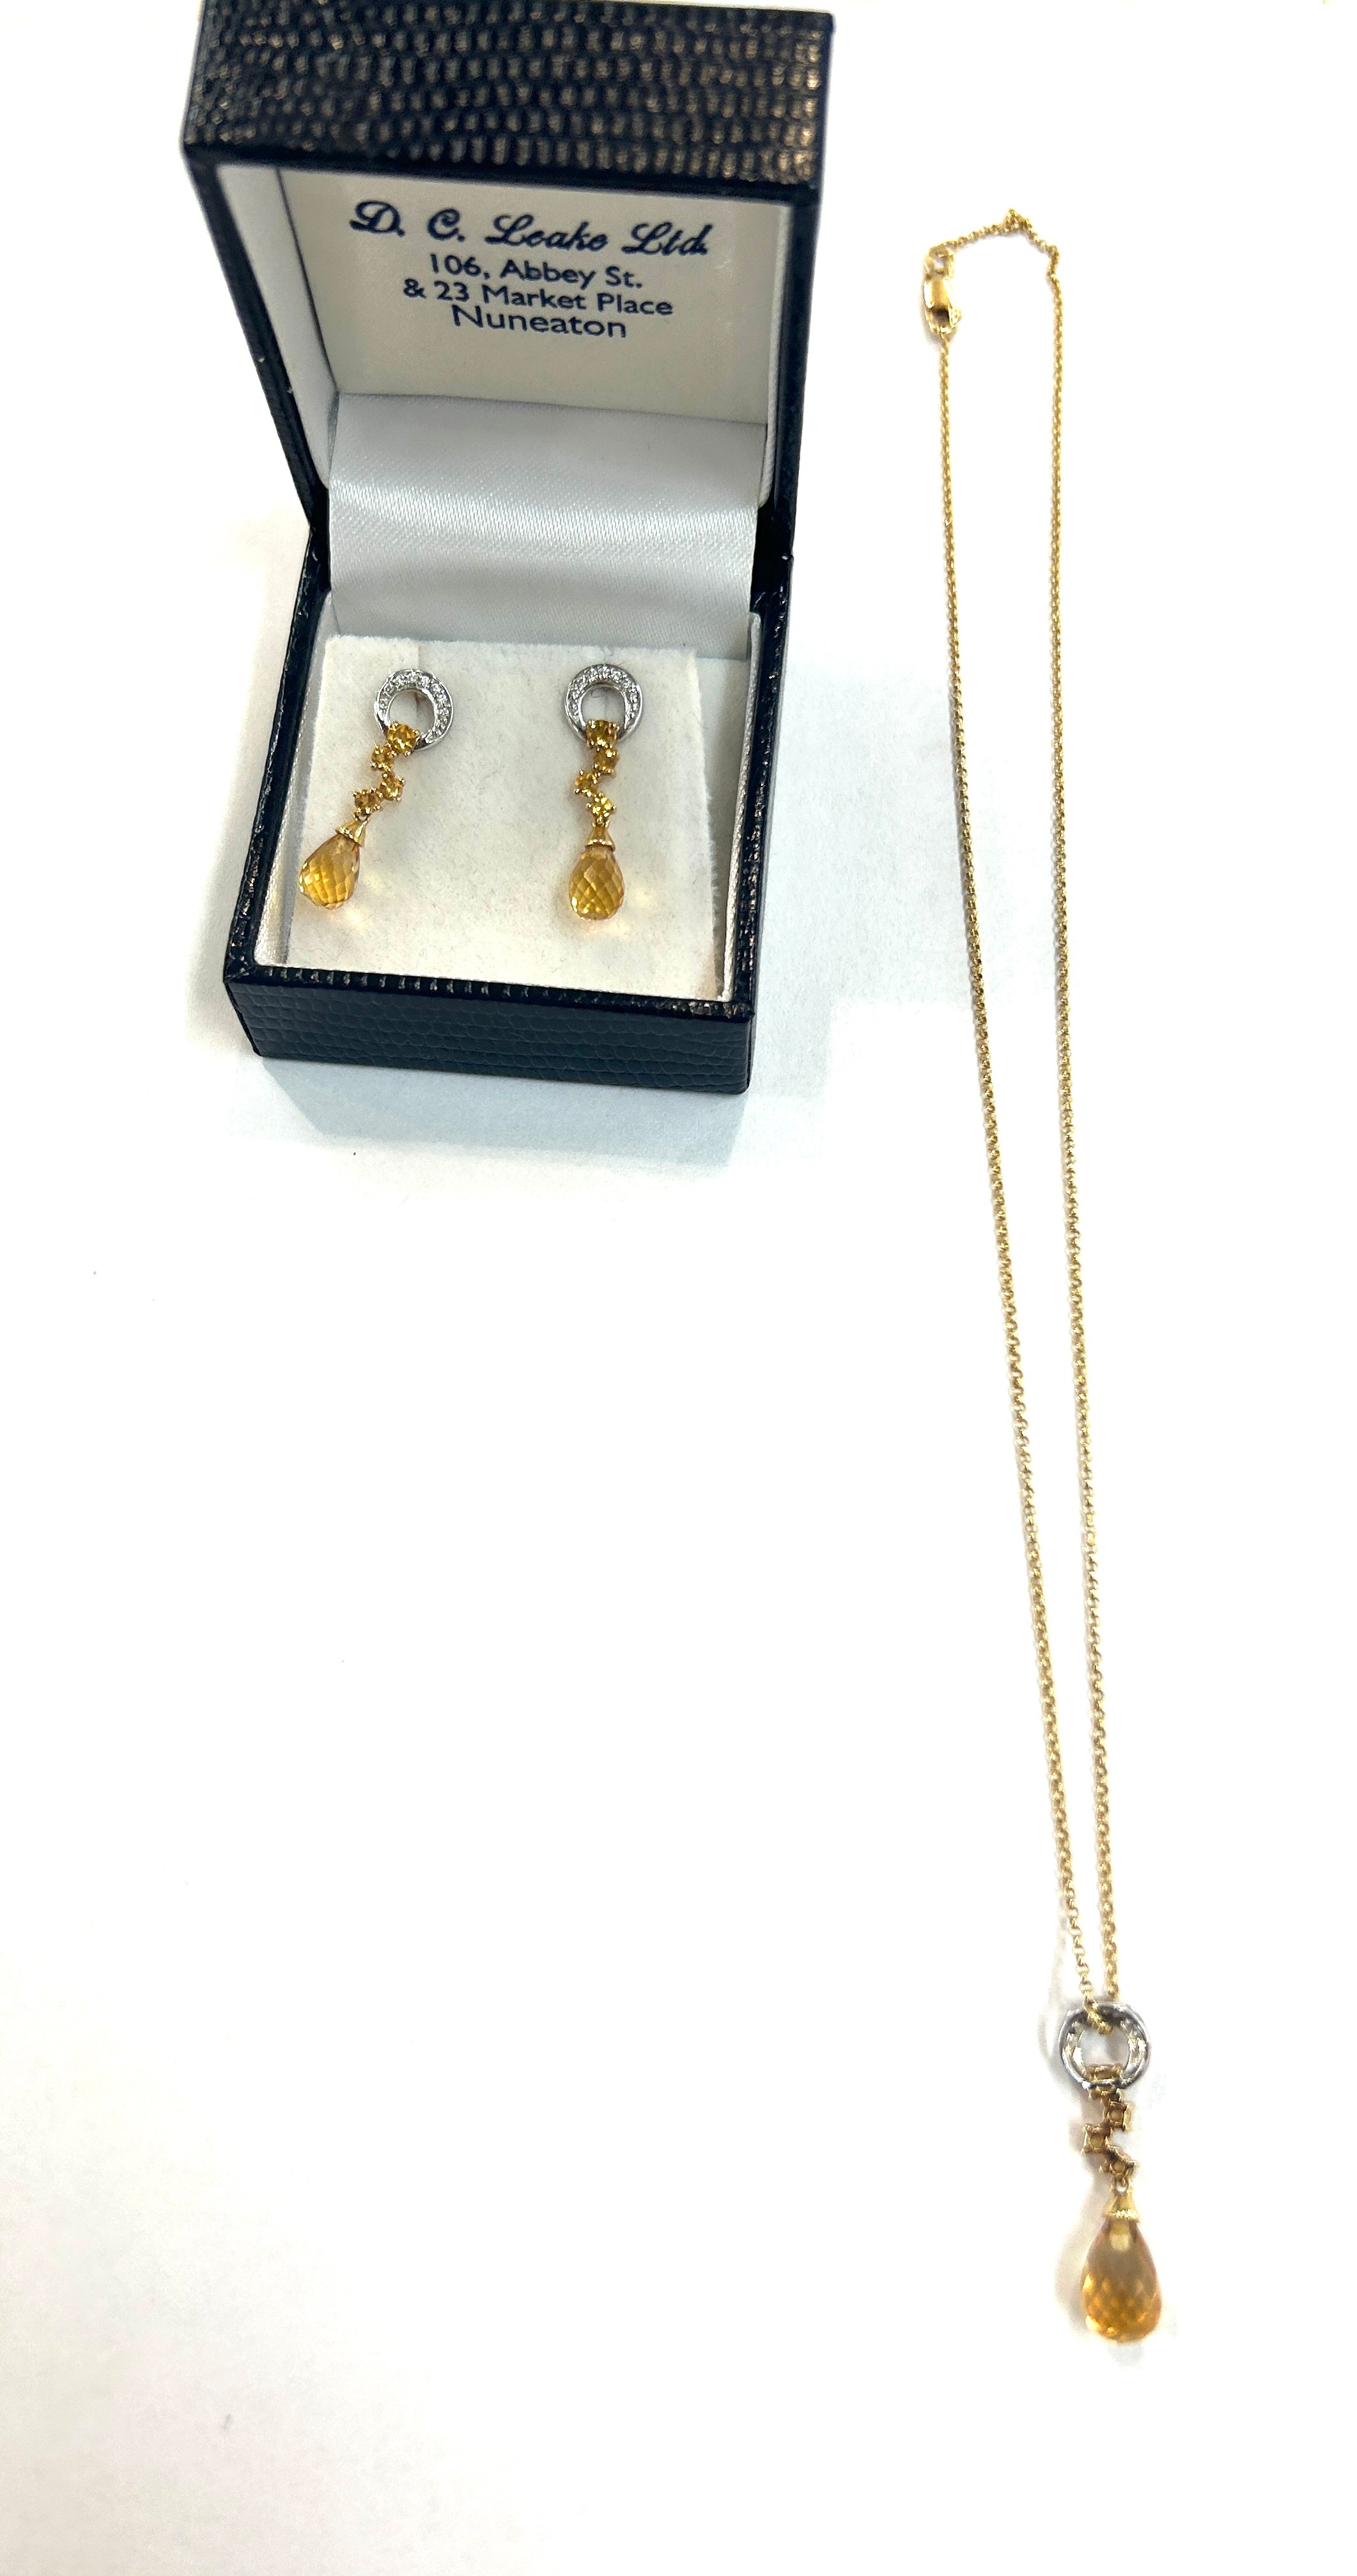 Ladies 9ct gold diamond and citrine set necklace and earring set total weight approx 5.7 grams